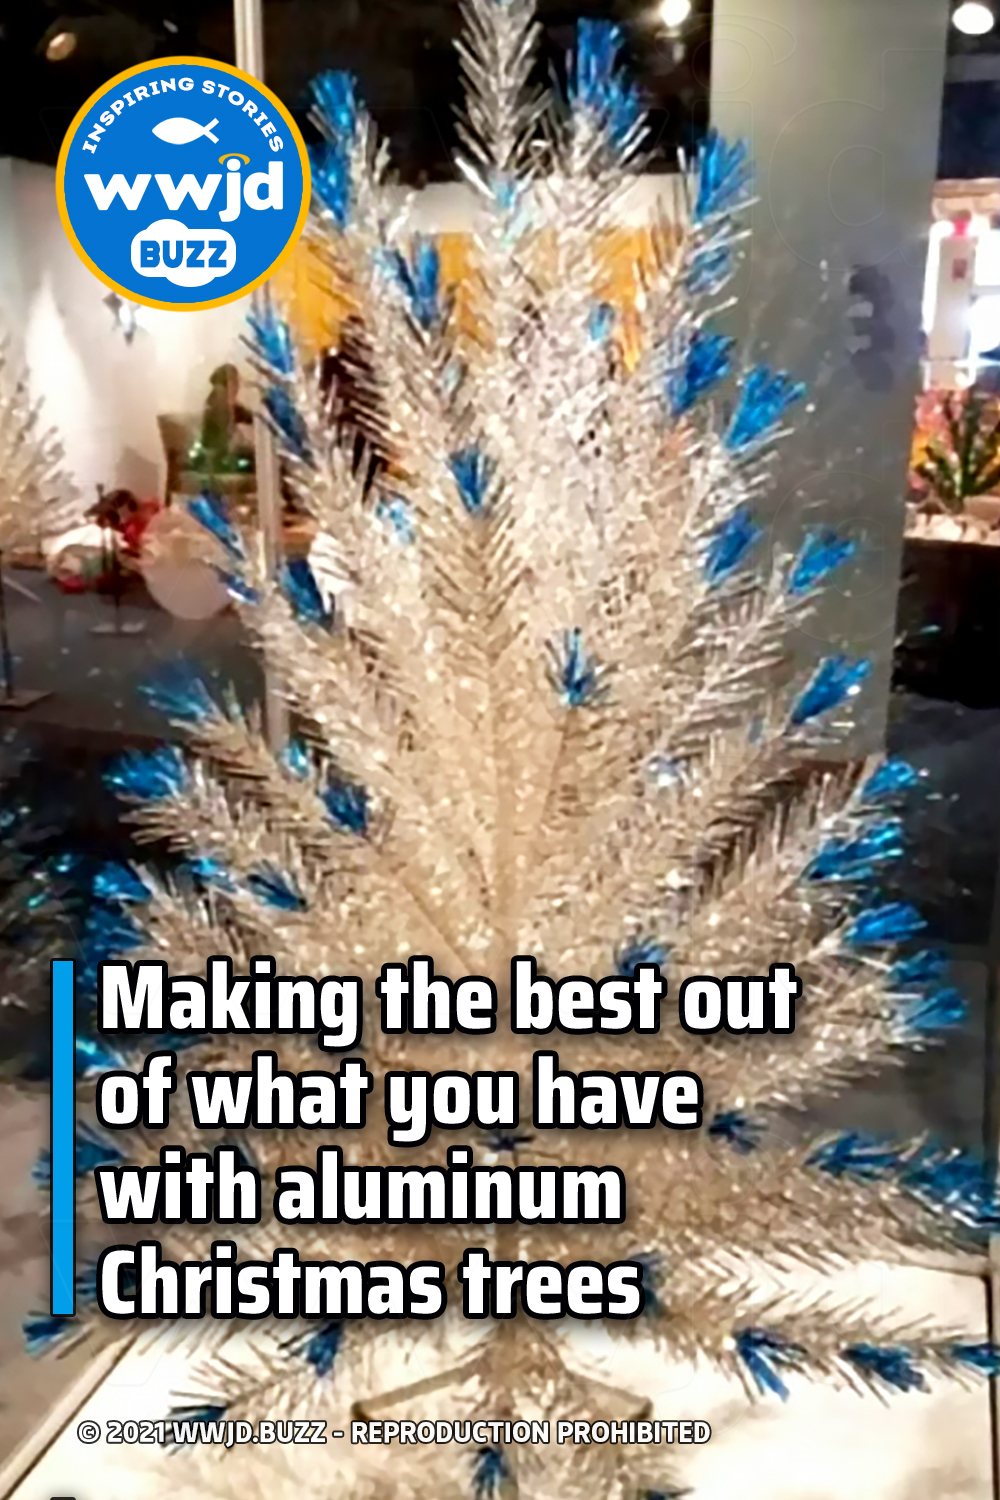 How A Charlie Brown Christmas rekindled the love for 1950’s style aluminum Christmas Trees